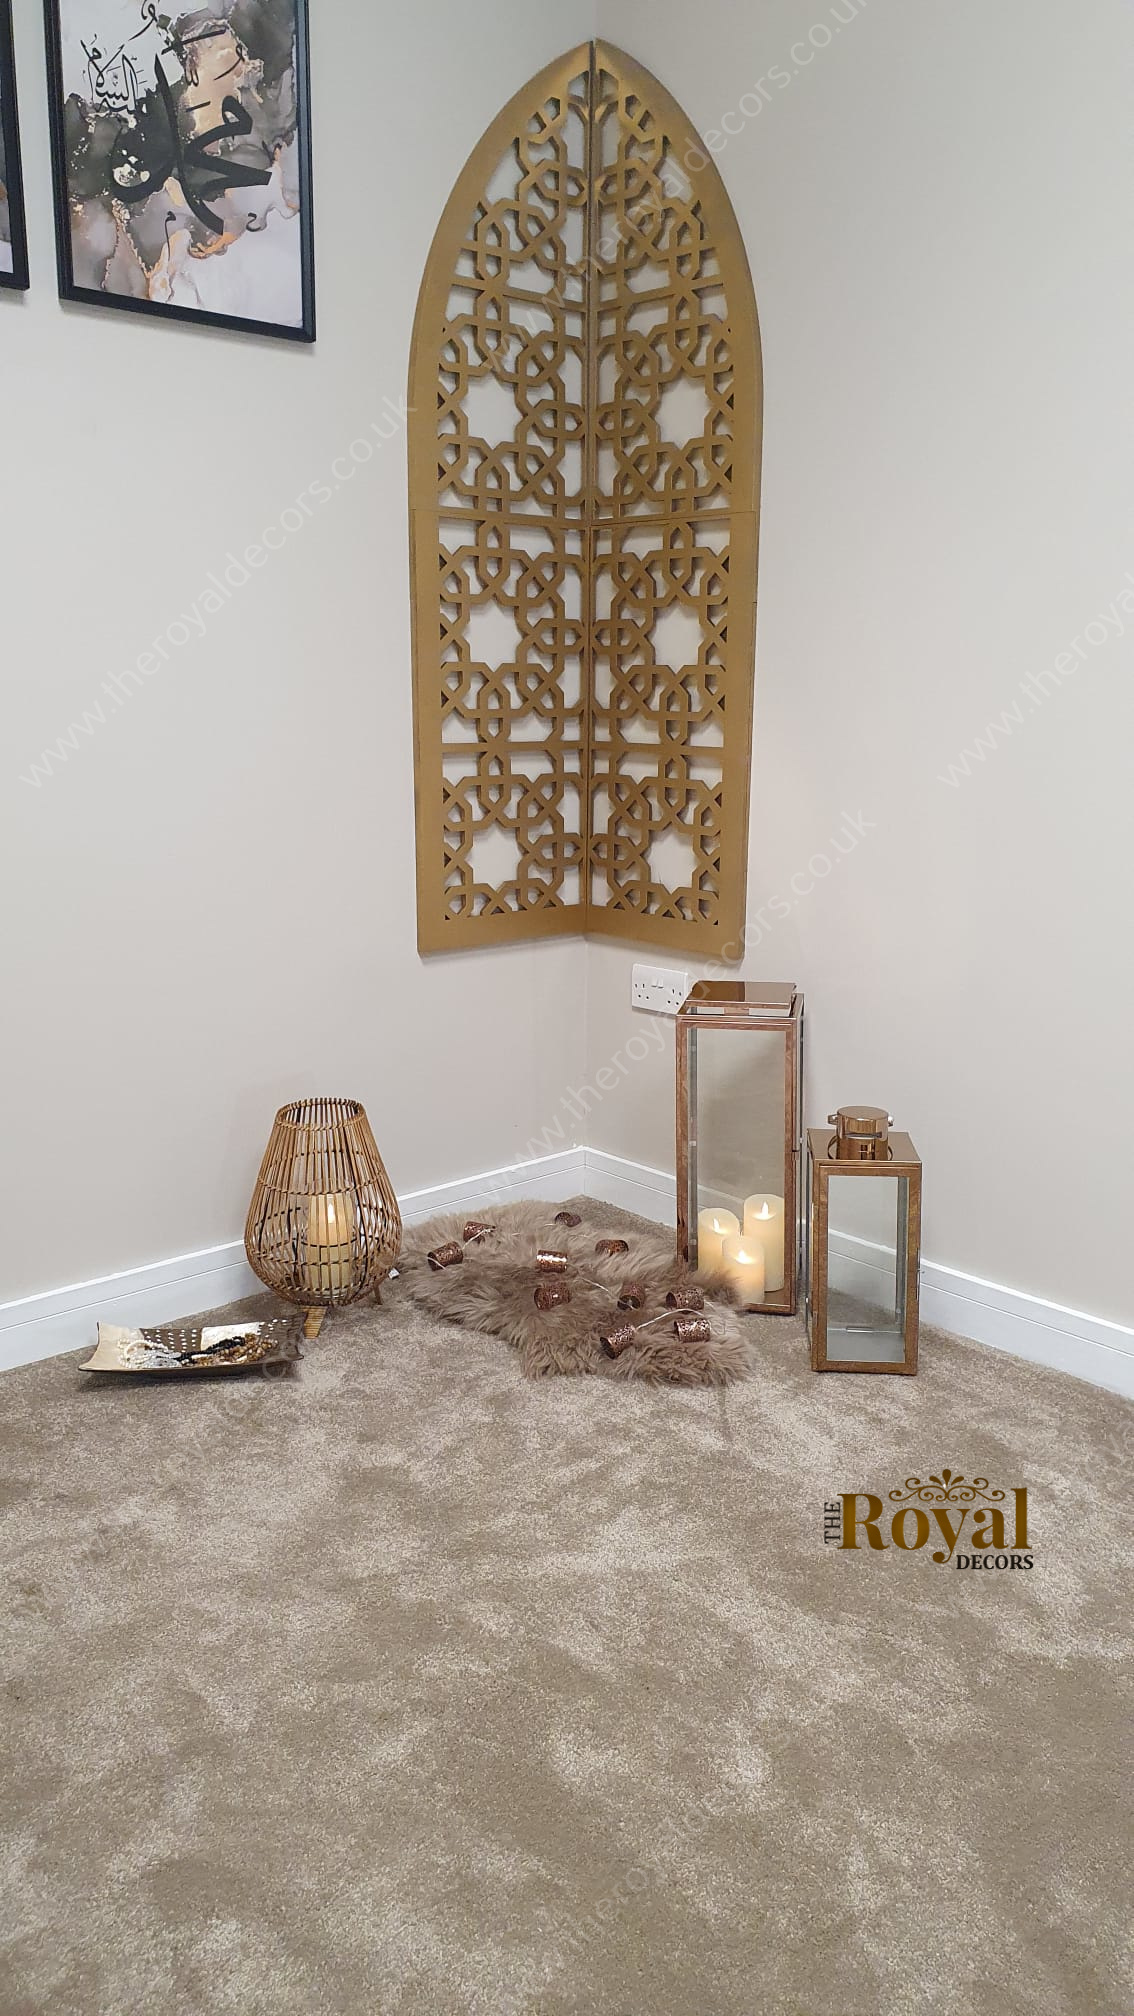 Wooden Geometric Arch Panel, Moroccan Decorative Wood Panel, Mehraab with LED Light for Prayer Room, Moroccan Arabic Arch Frame, Islamic Art, corner wall decor panel 2